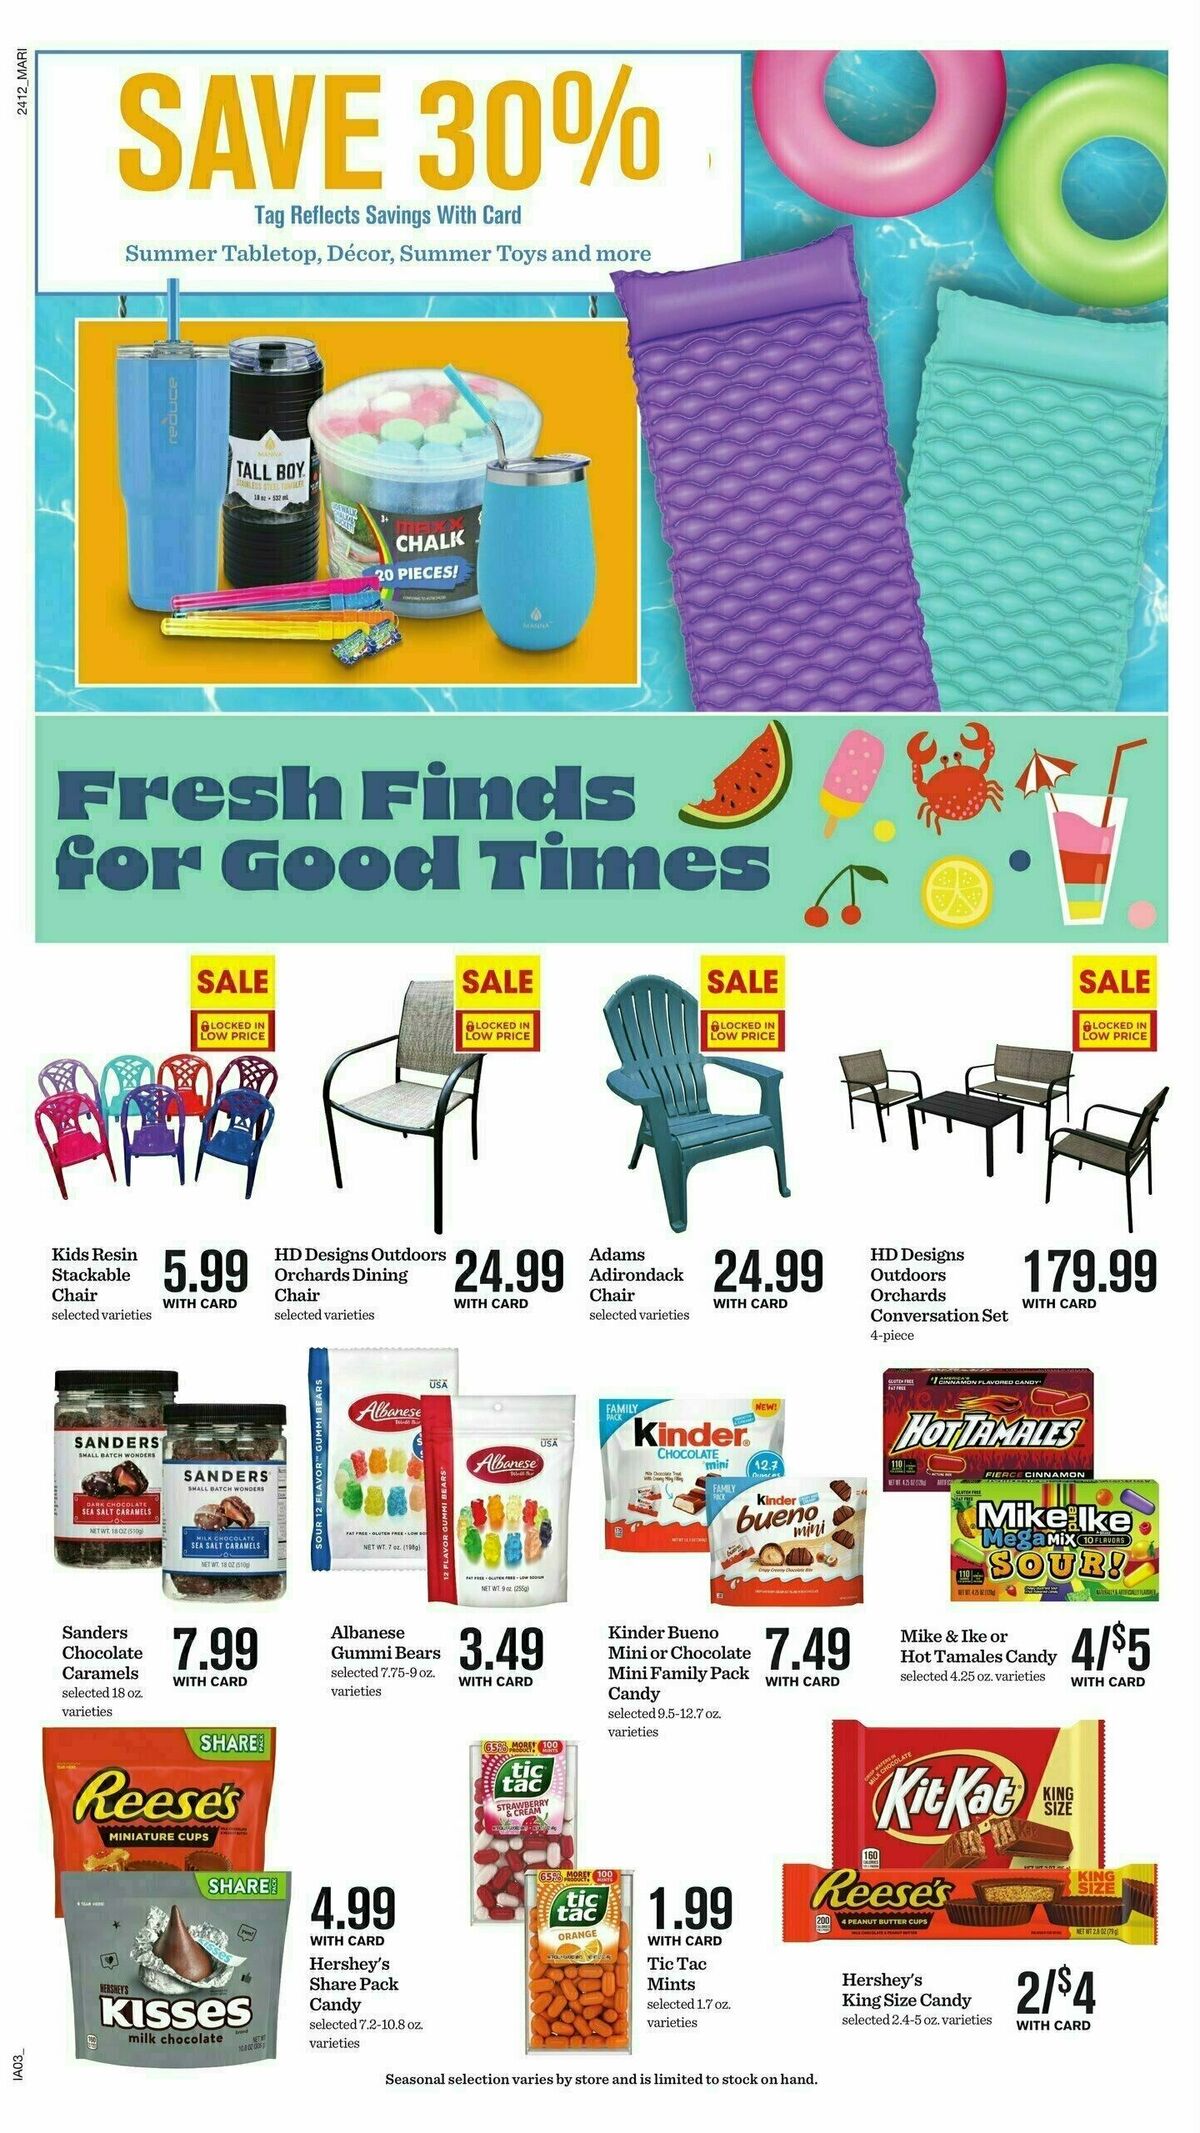 Mariano's Weekly Ad from April 24